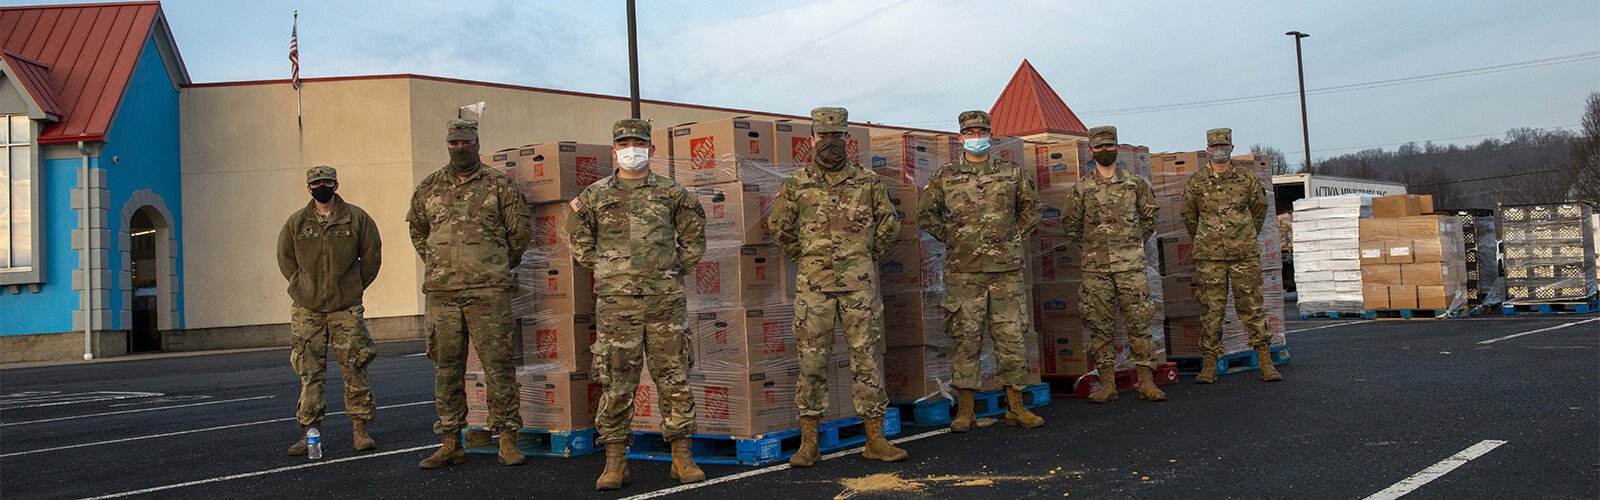 Kentucky National Guard members helped with food distribution at Action Ministries in Latonia.